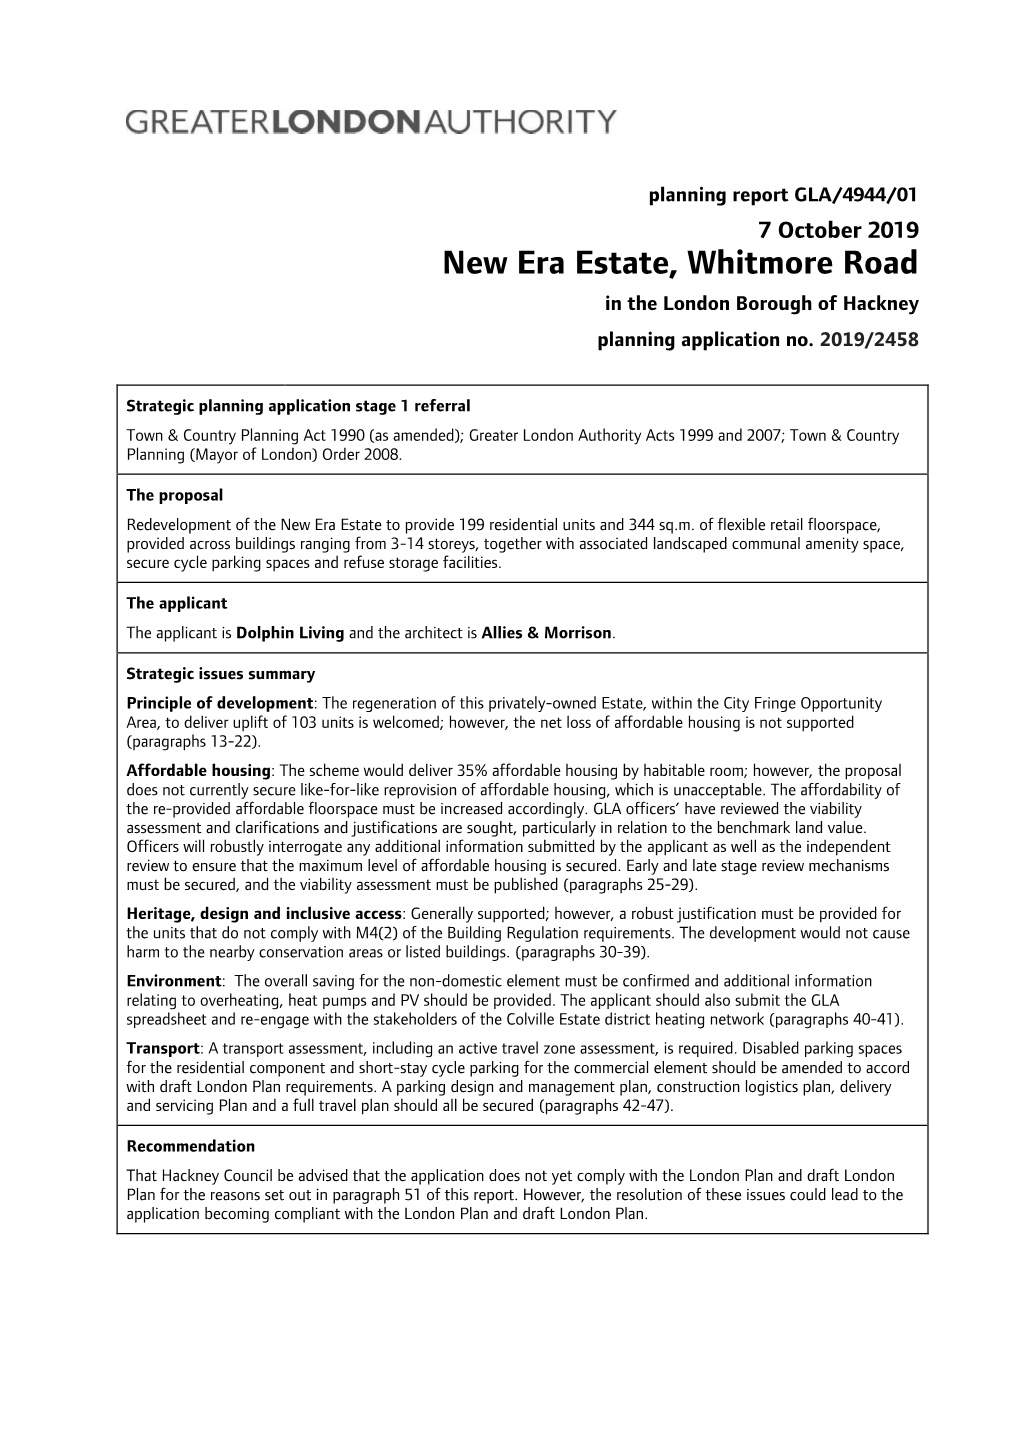 New Era Estate, Whitmore Road in the London Borough of Hackney Planning Application No